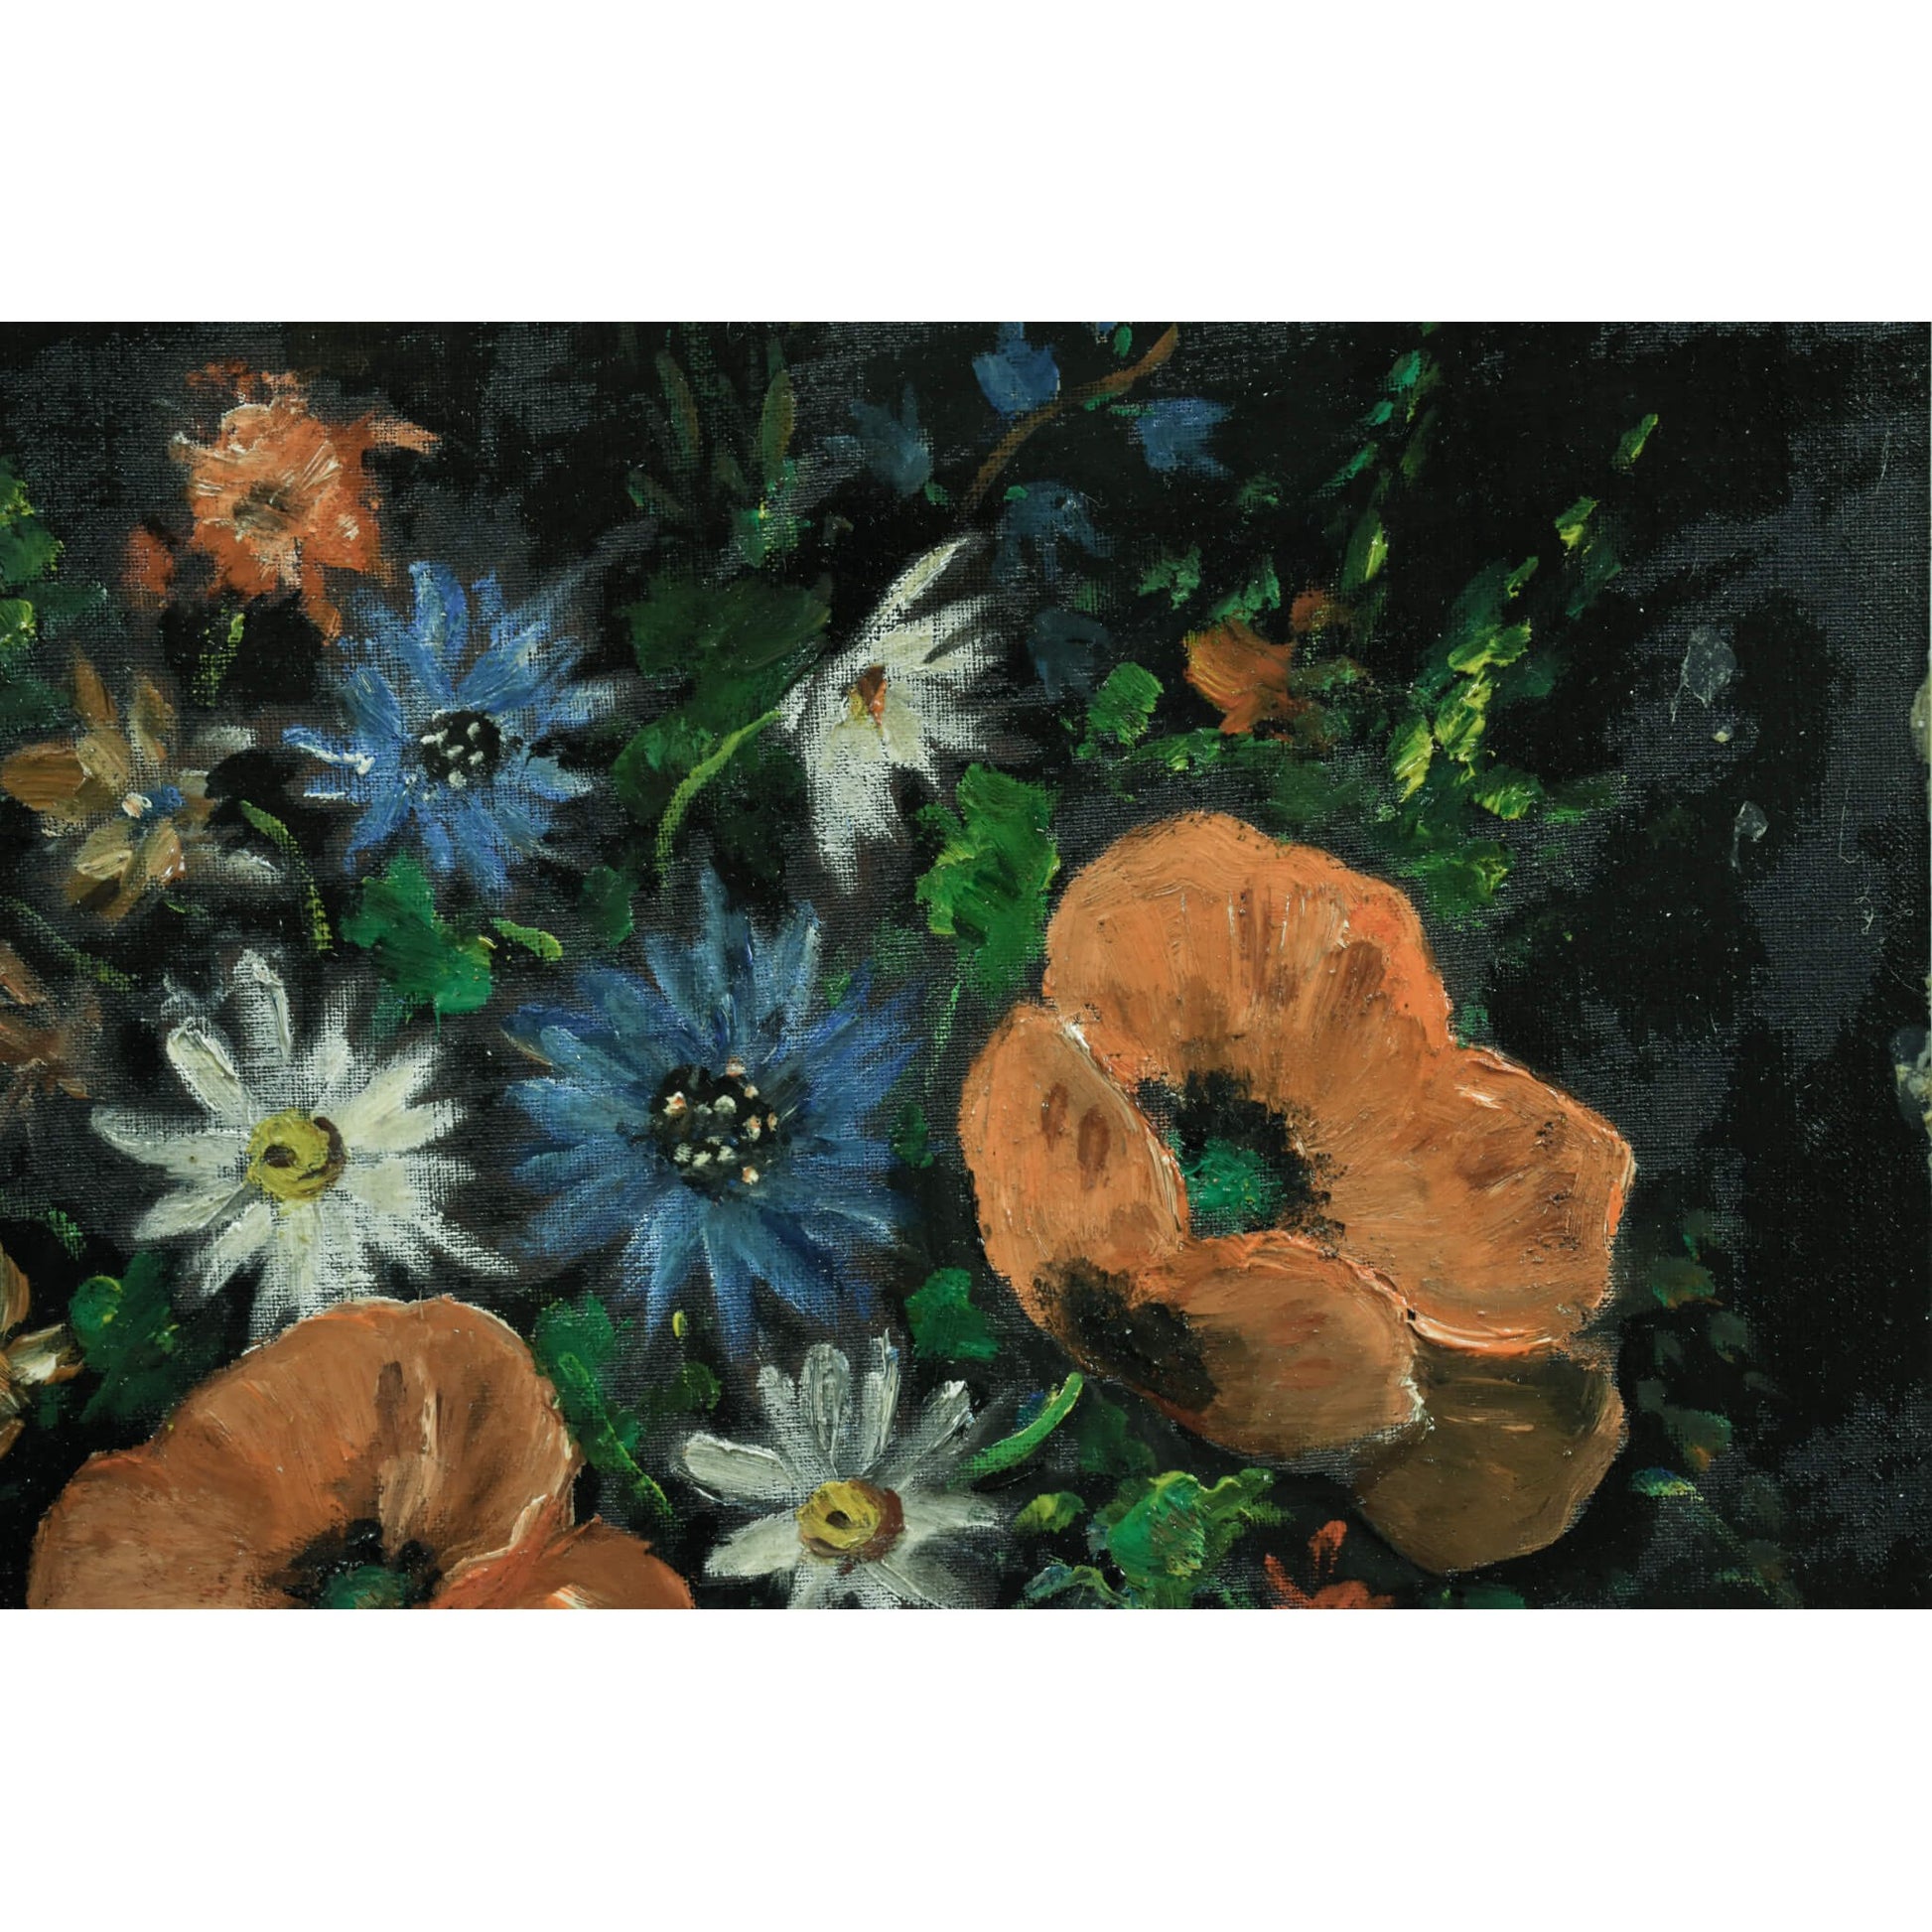 Vintage oil painting still life, poppies and daisies in a vase, circa 1950, for sale at Winckelmann Gallery